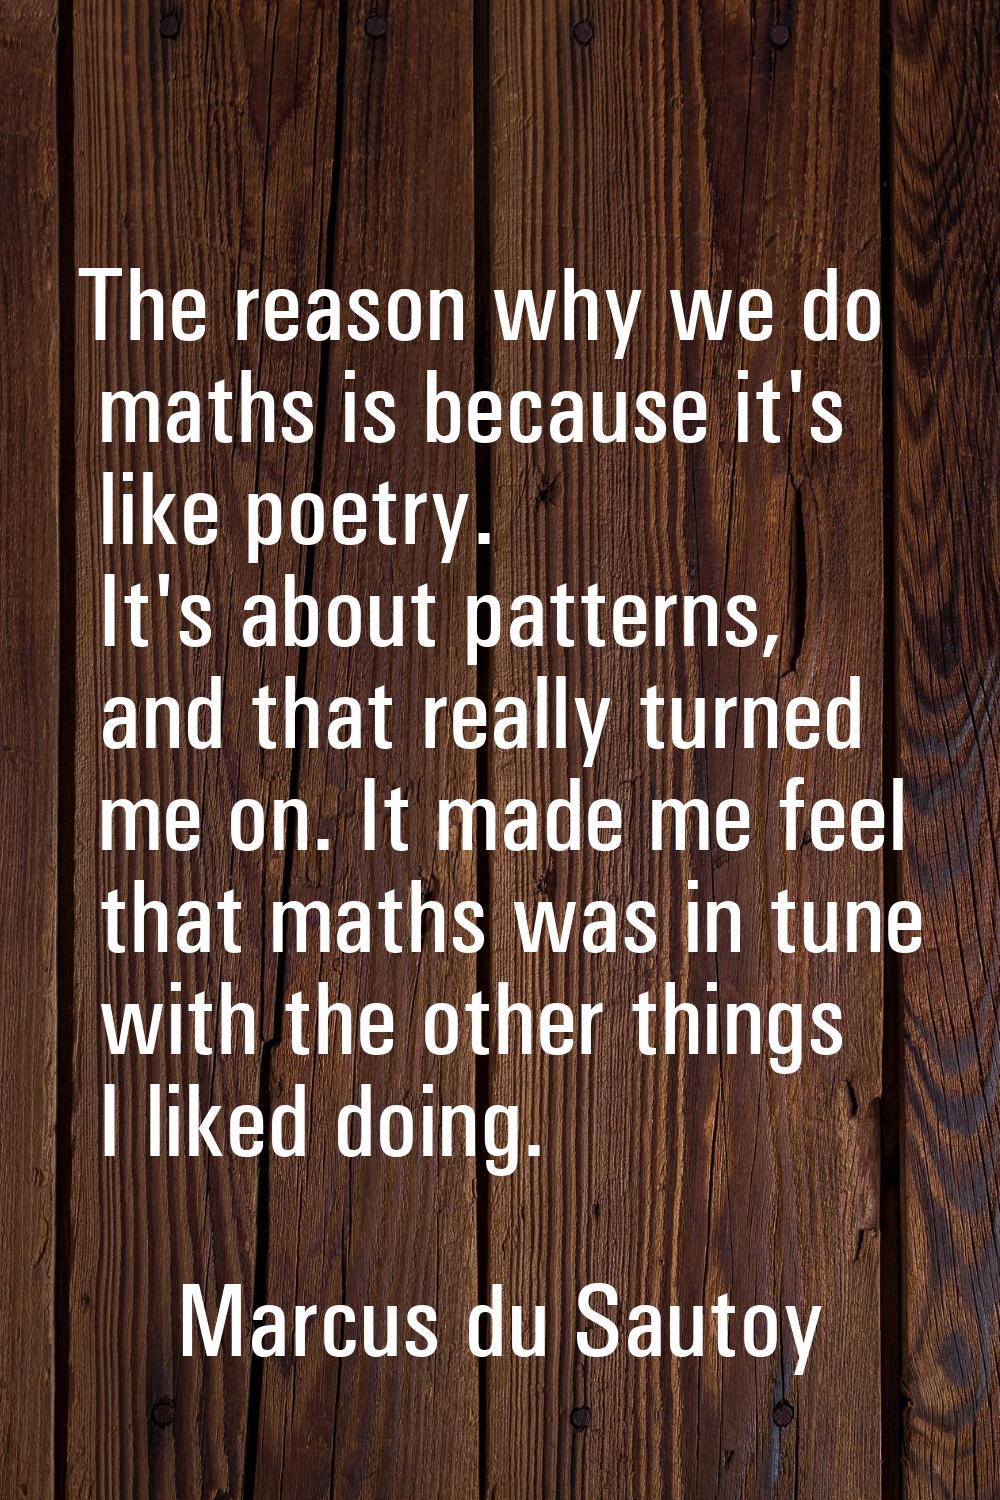 The reason why we do maths is because it's like poetry. It's about patterns, and that really turned